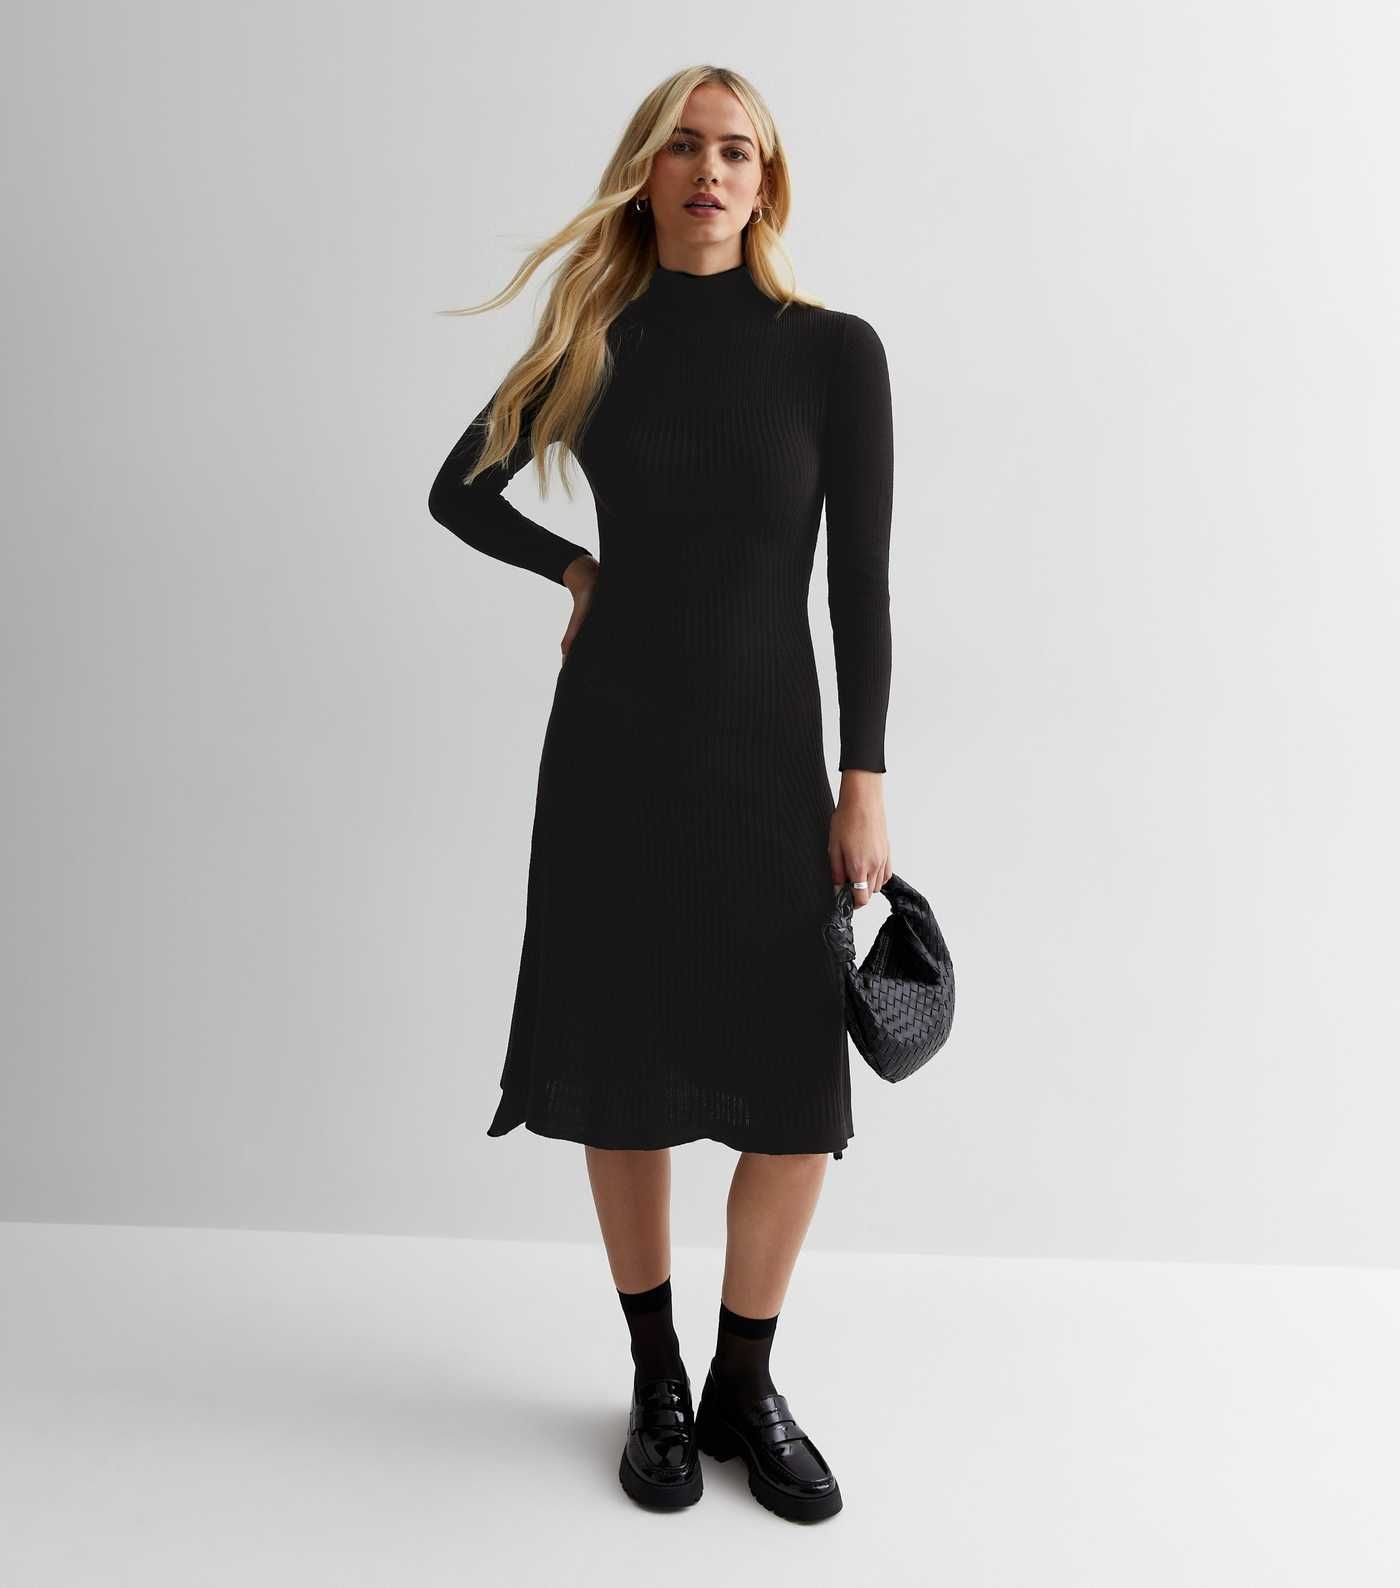 Black Ribbed Knit High Neck Midaxi Dress
						
						Add to Saved Items
						Remove from Saved ... | New Look (UK)